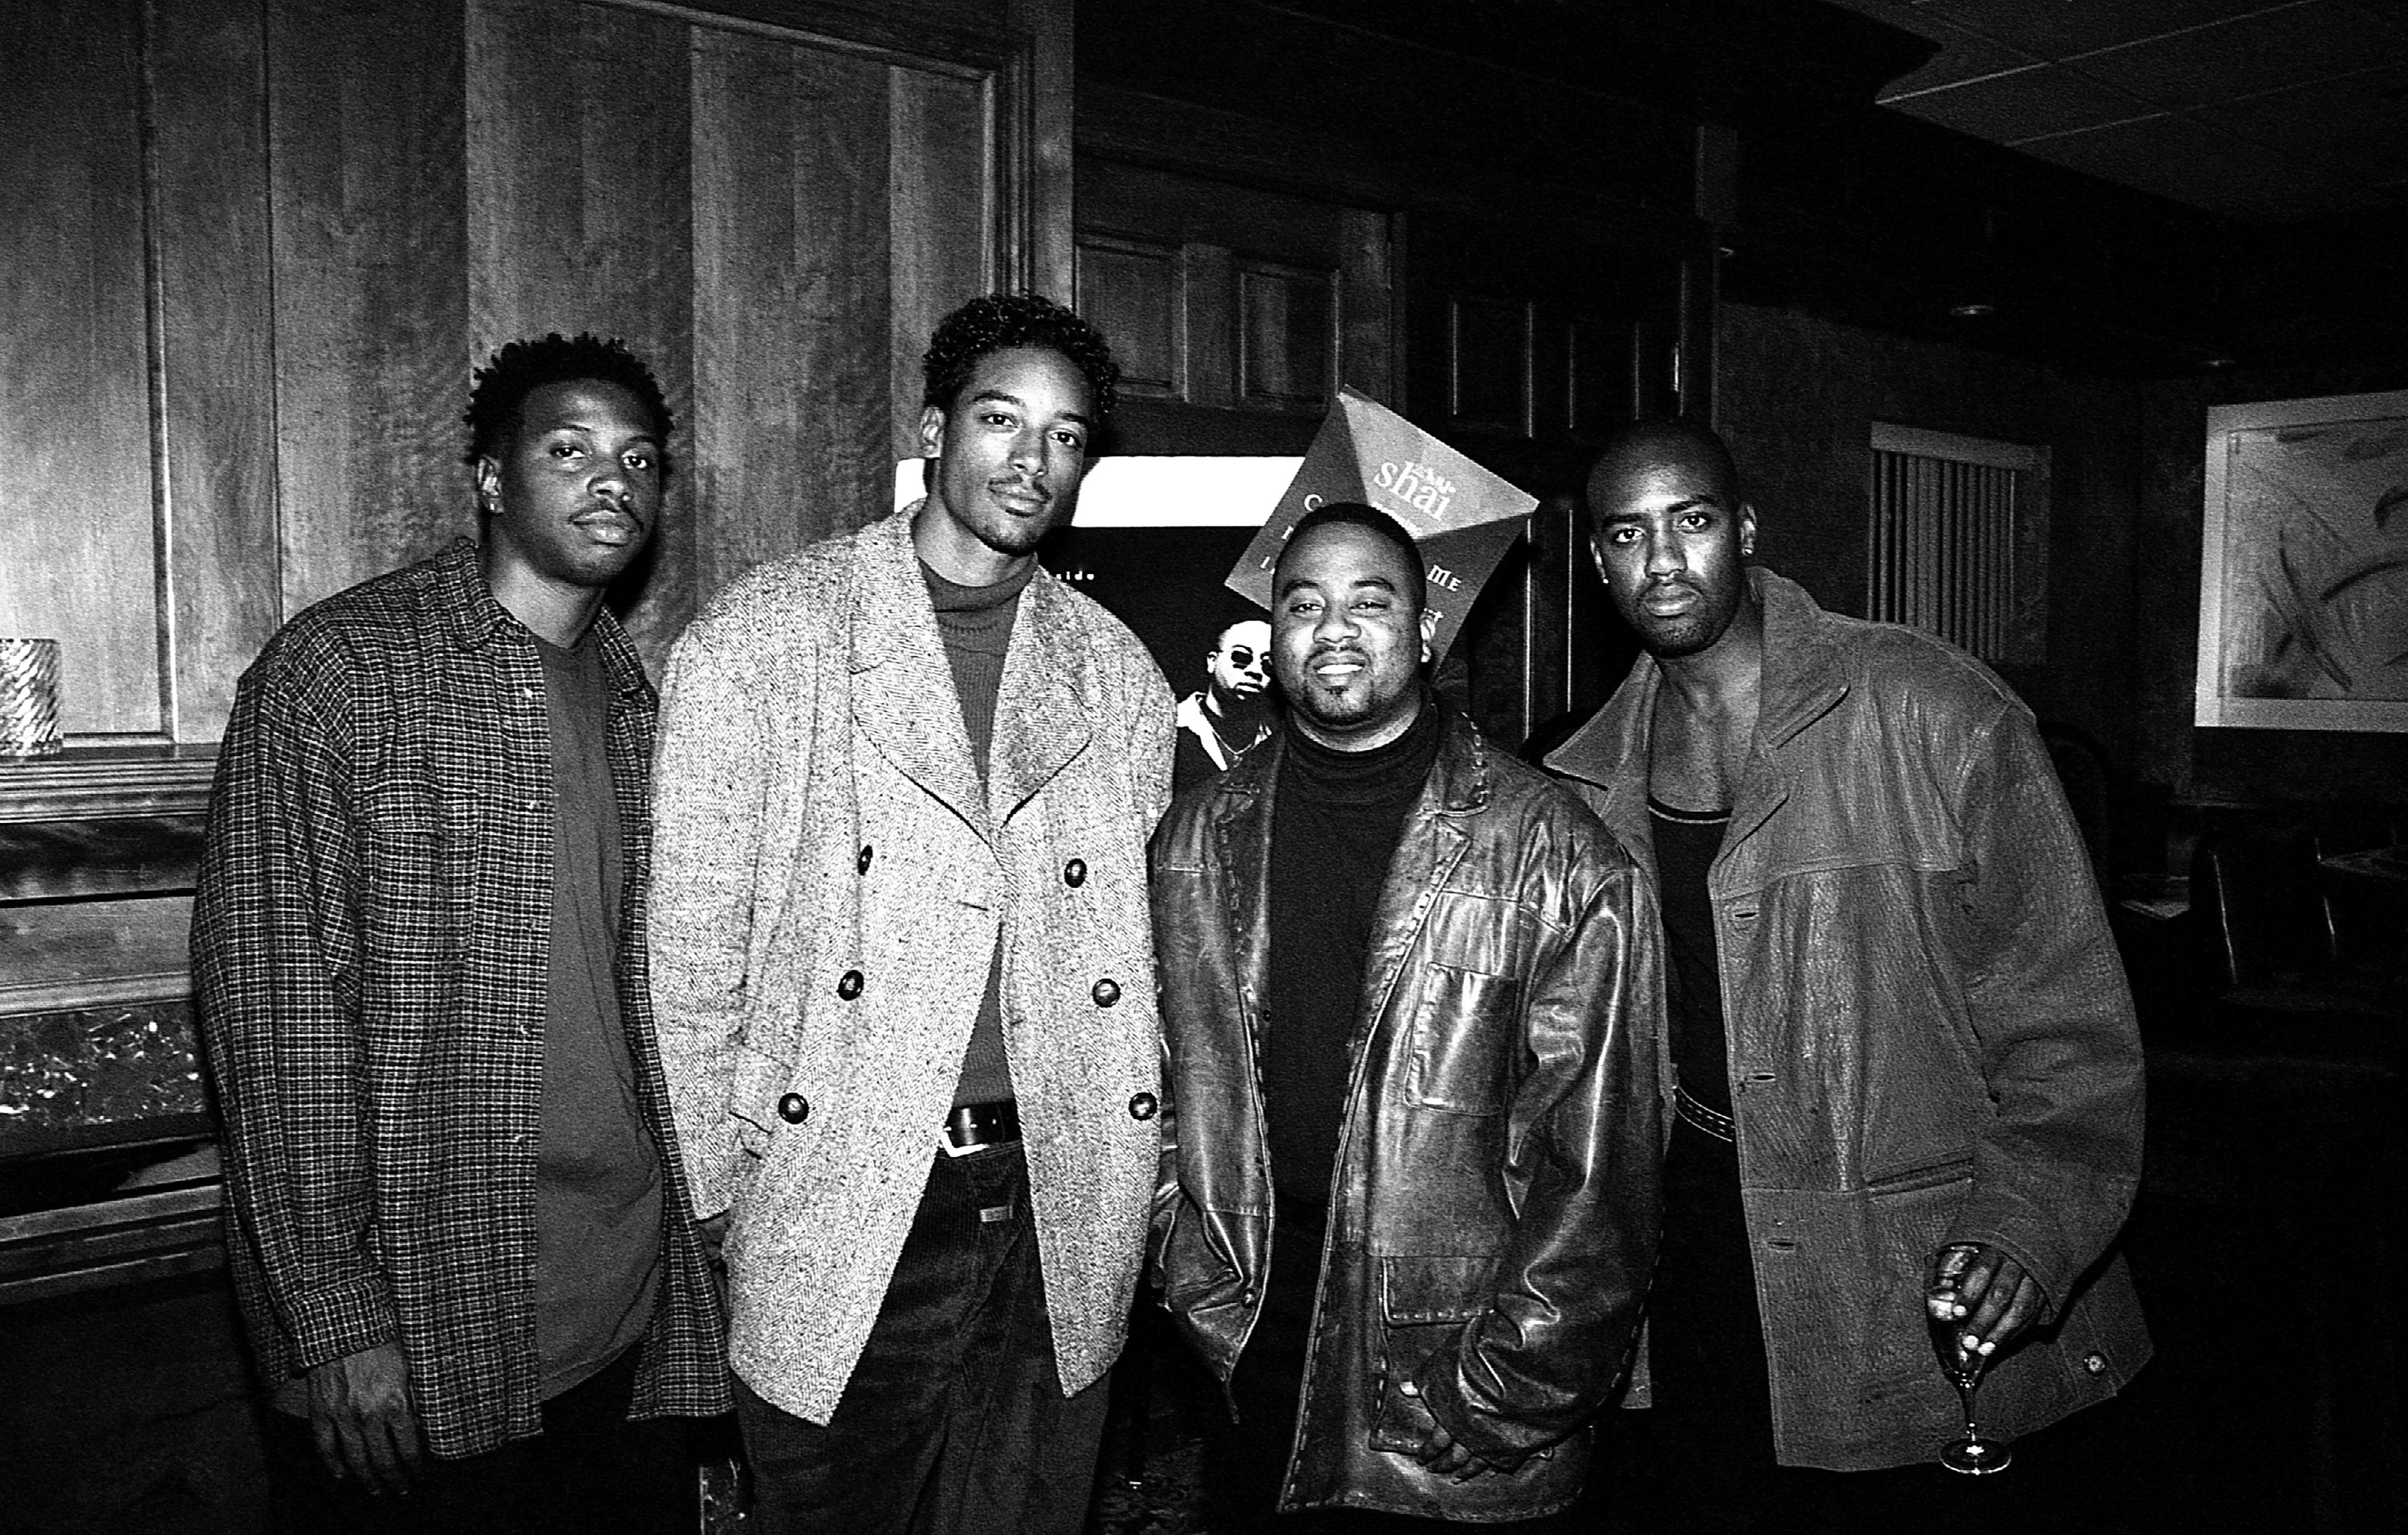 Singers Darnell Van Rensalier, Garfield Bright, Marc Gay and Carl Martin of Shai poses for photos backstage at Magnum&#x27;s in Chicago, Illinois